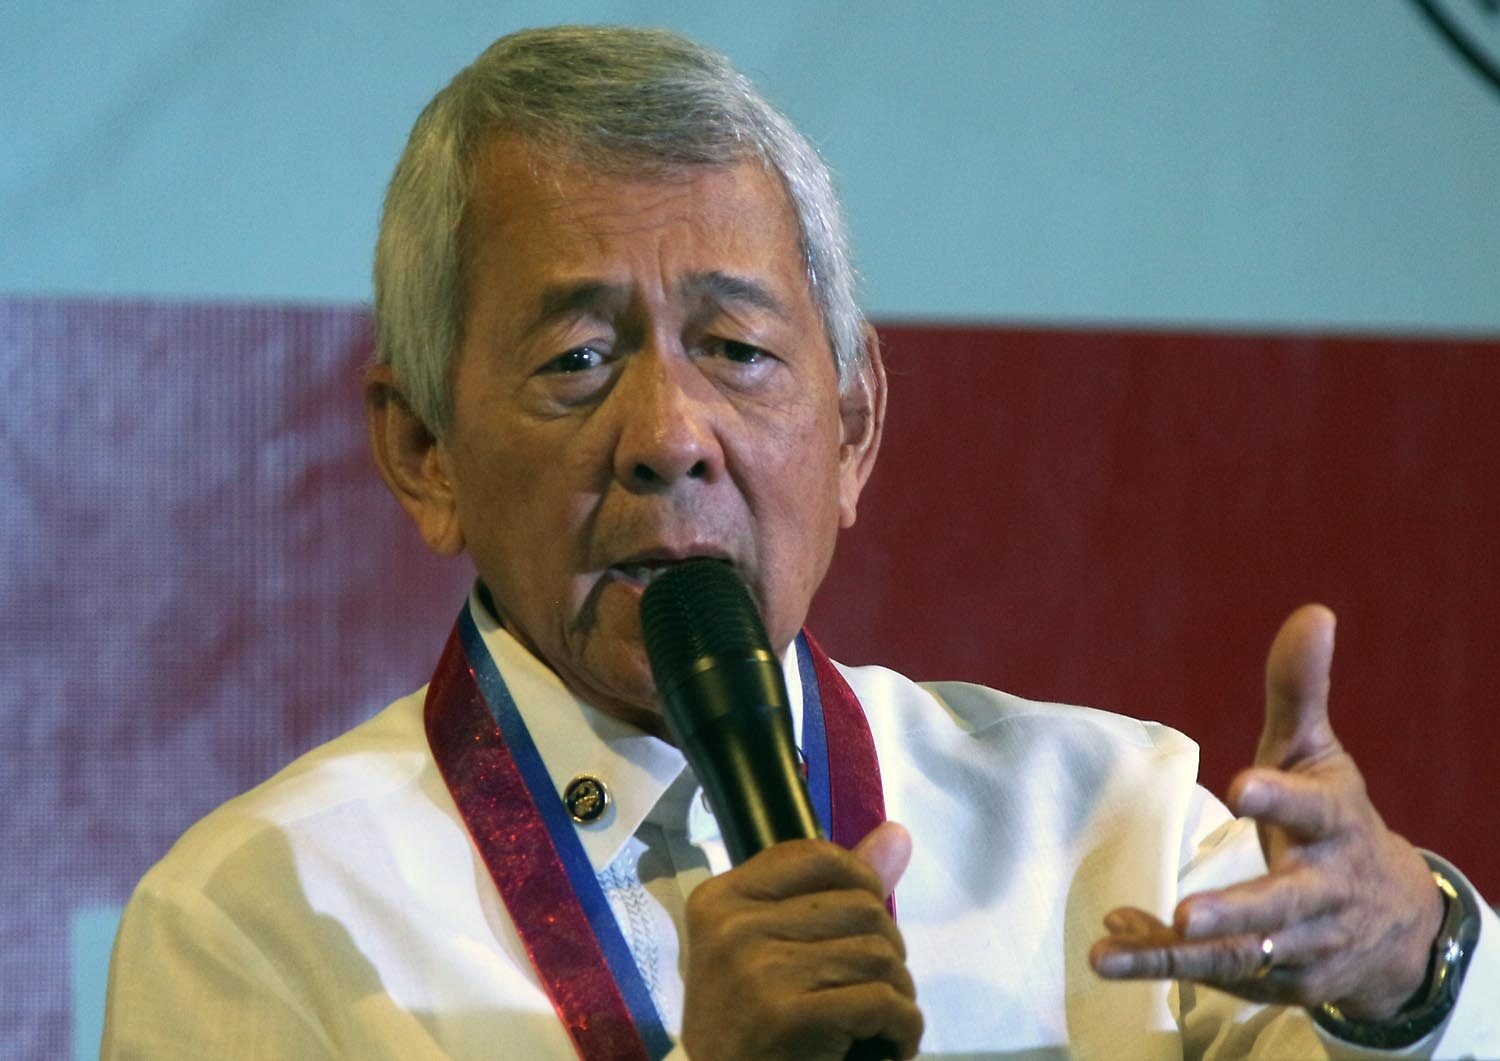 Yasay to US: Friends don’t give aid with conditions